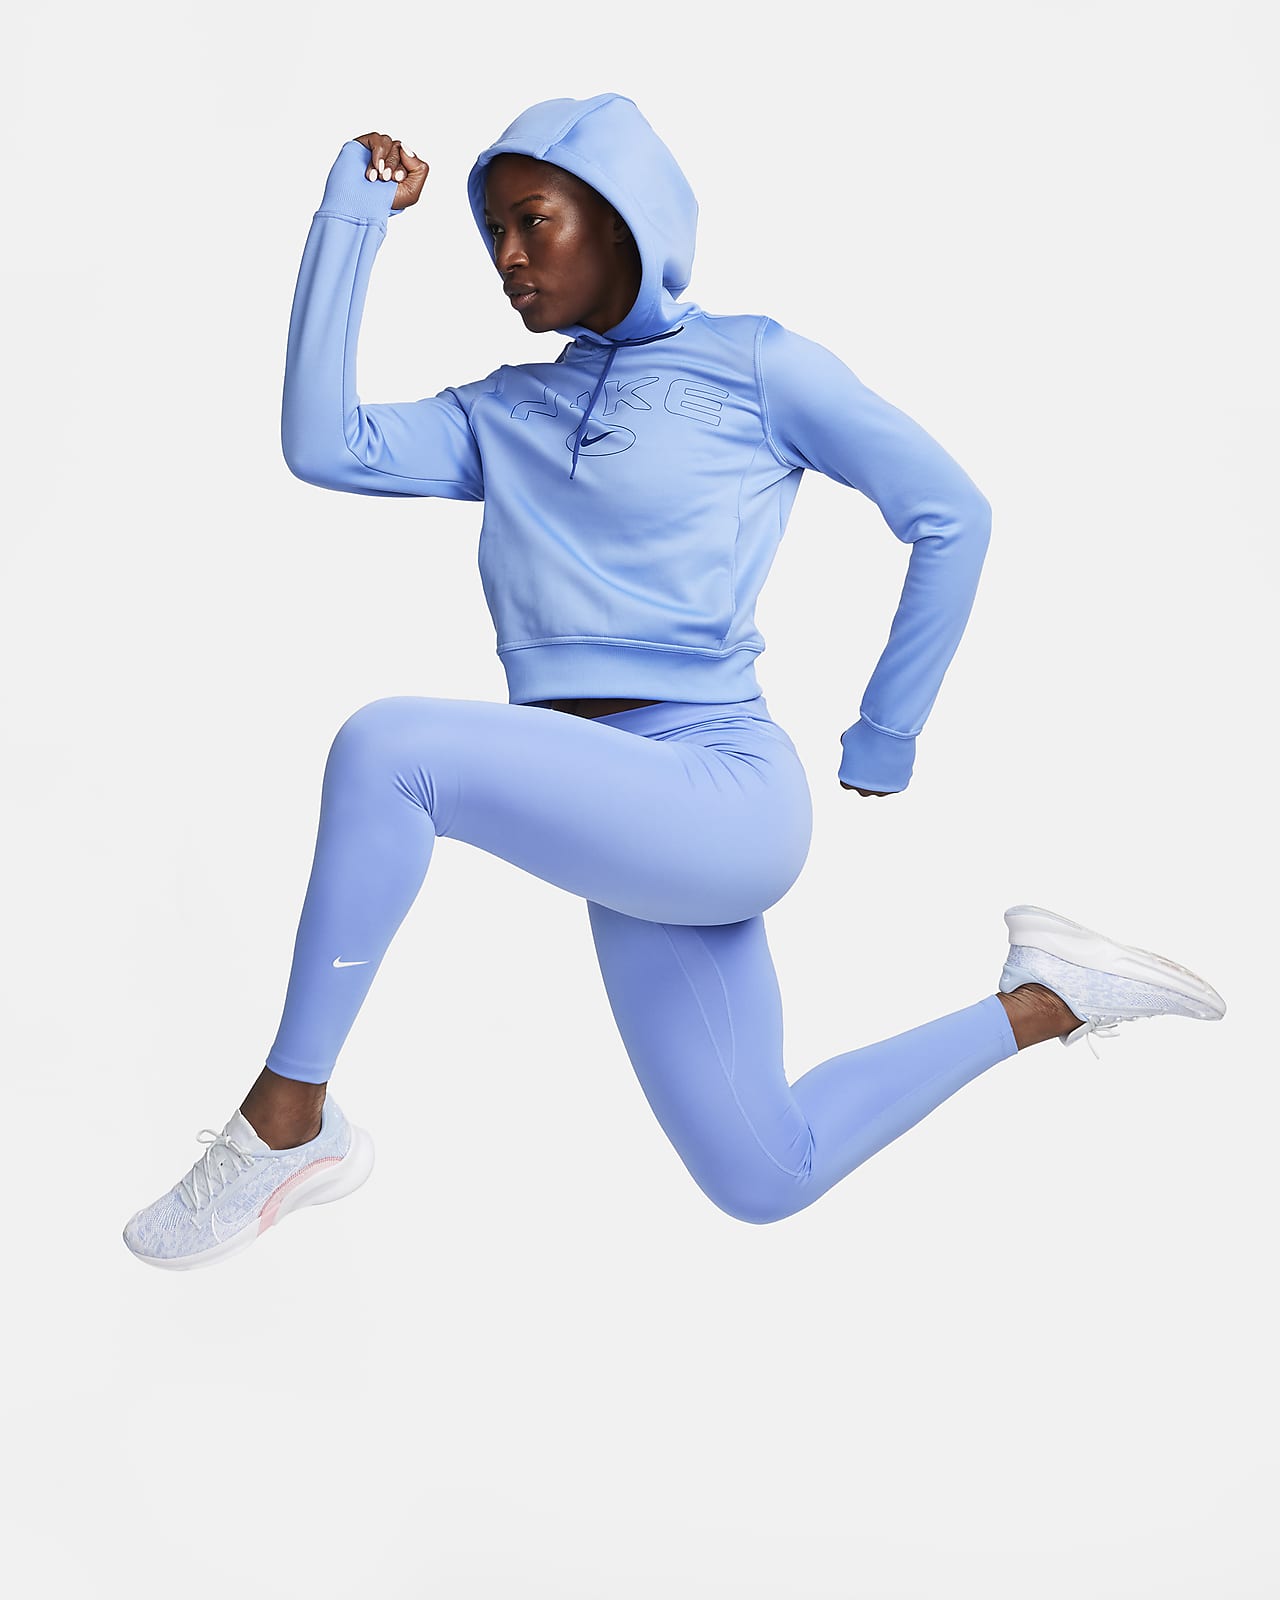 Women's Royal Blue Sporty Stretchy Hoodie and Legging Set